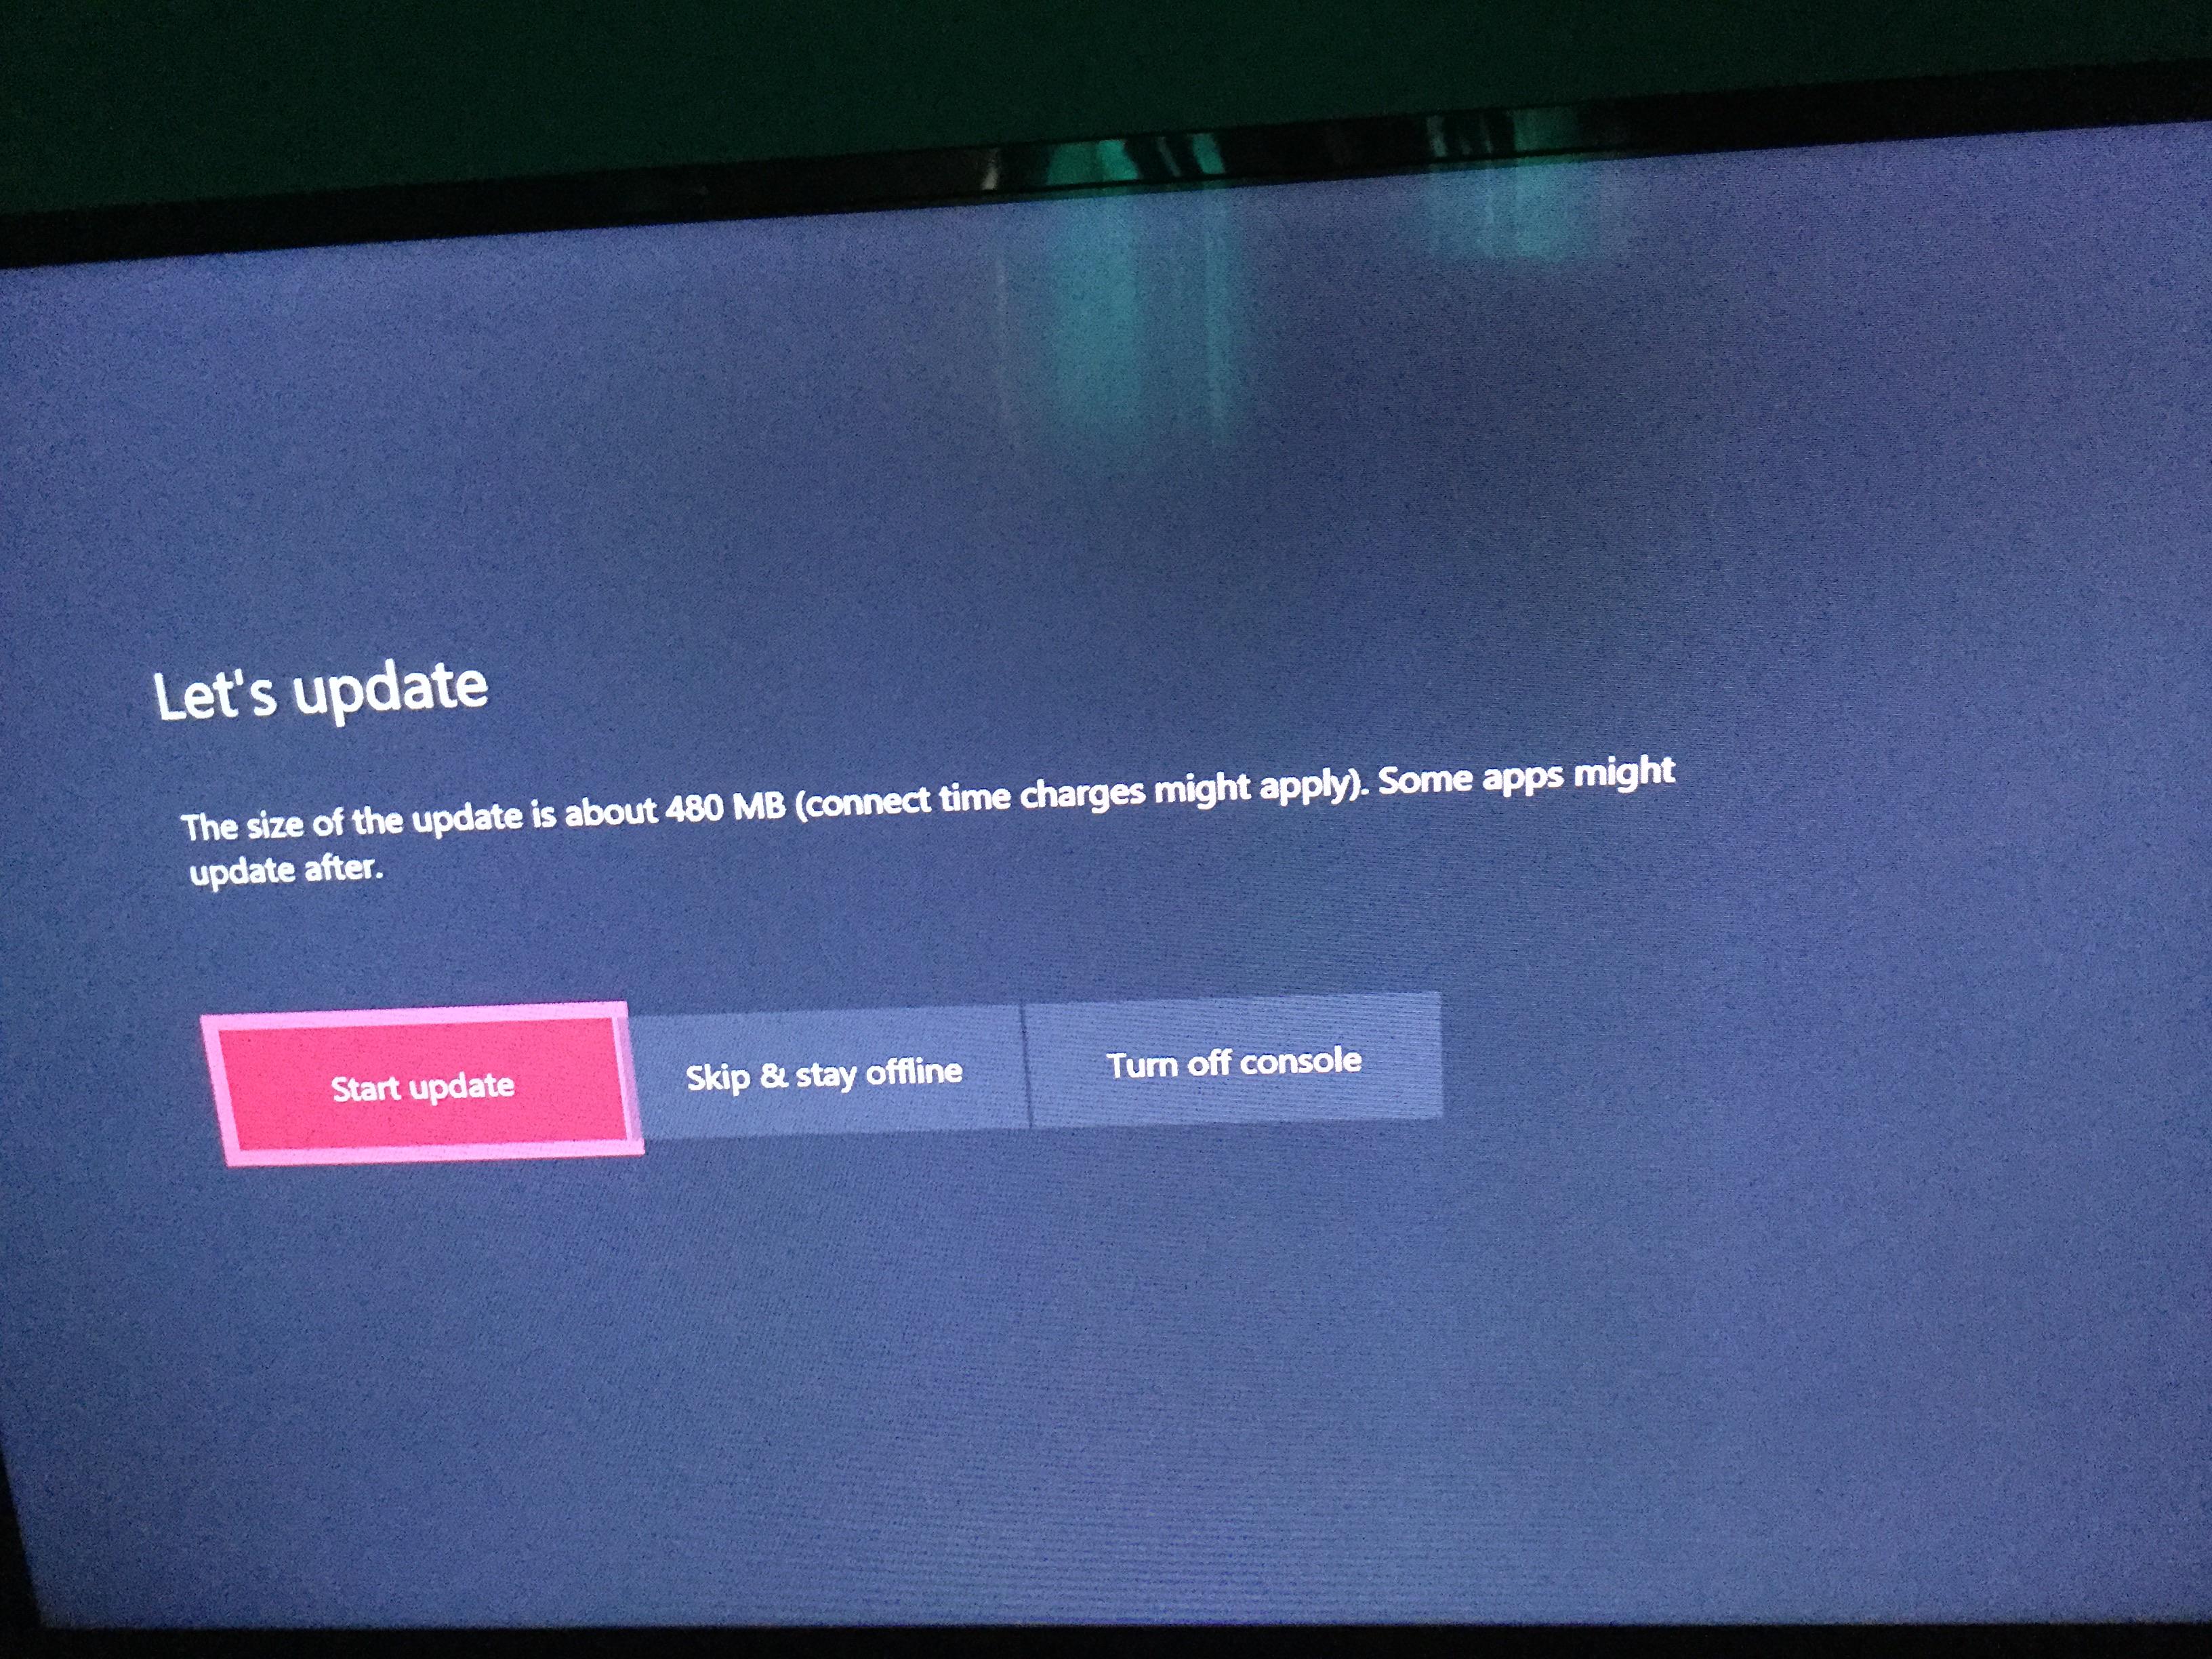 Press the Xbox button on the console to turn it on.
Attempt to update your Xbox One again.